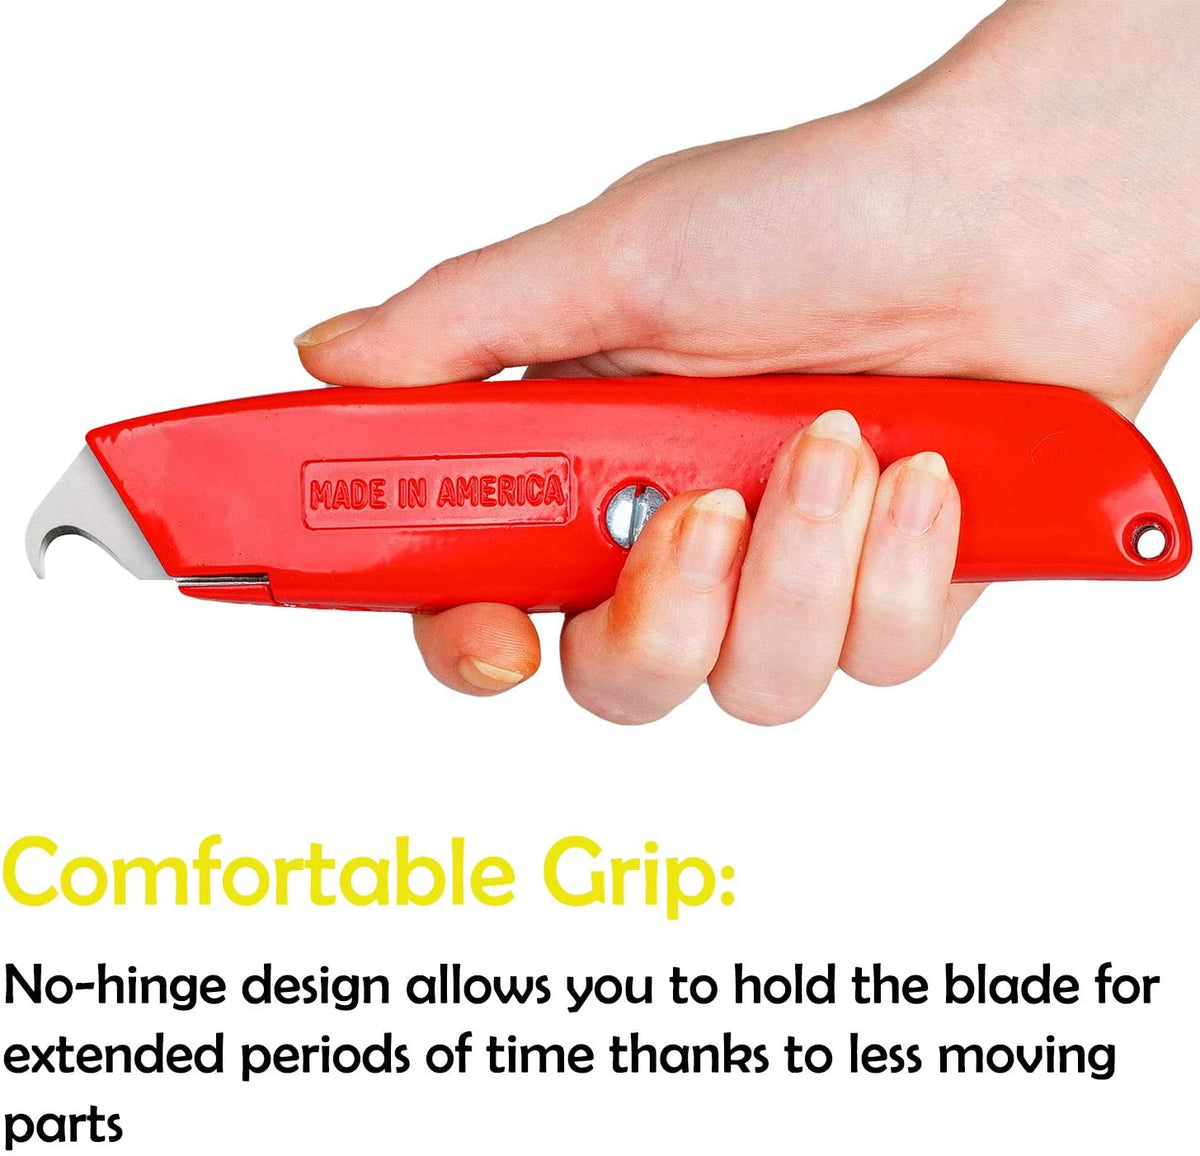 Hook Blade Utility Knife with 5 Utility Hook Blades, Shingle Cutter